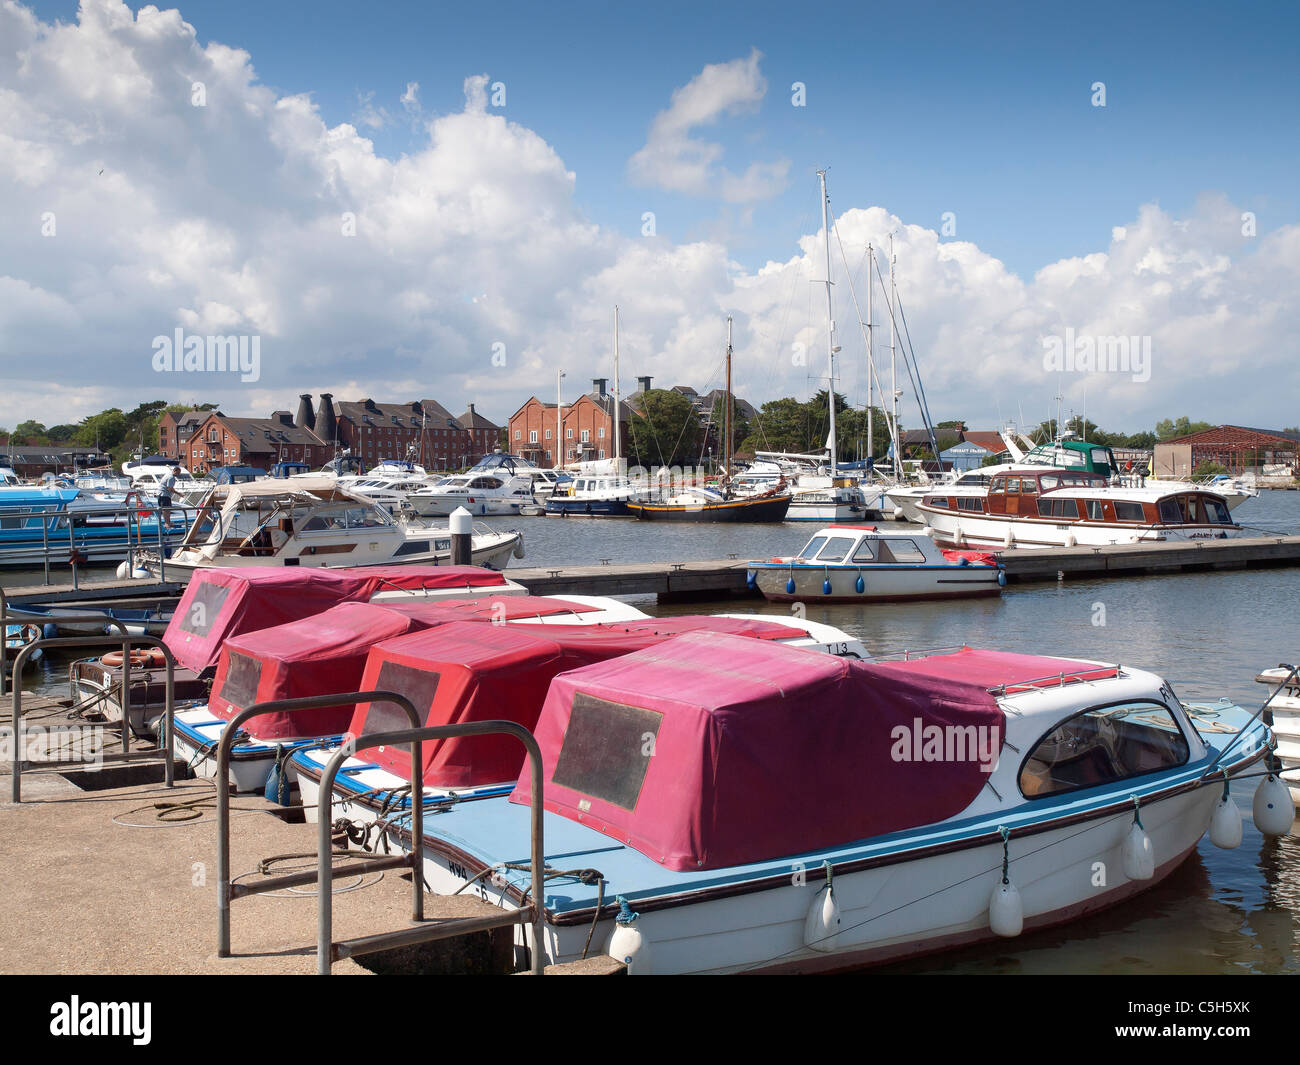 Pleasure boats and boats for hire at Oulton Broad on the river Waveney Suffolk Stock Photo